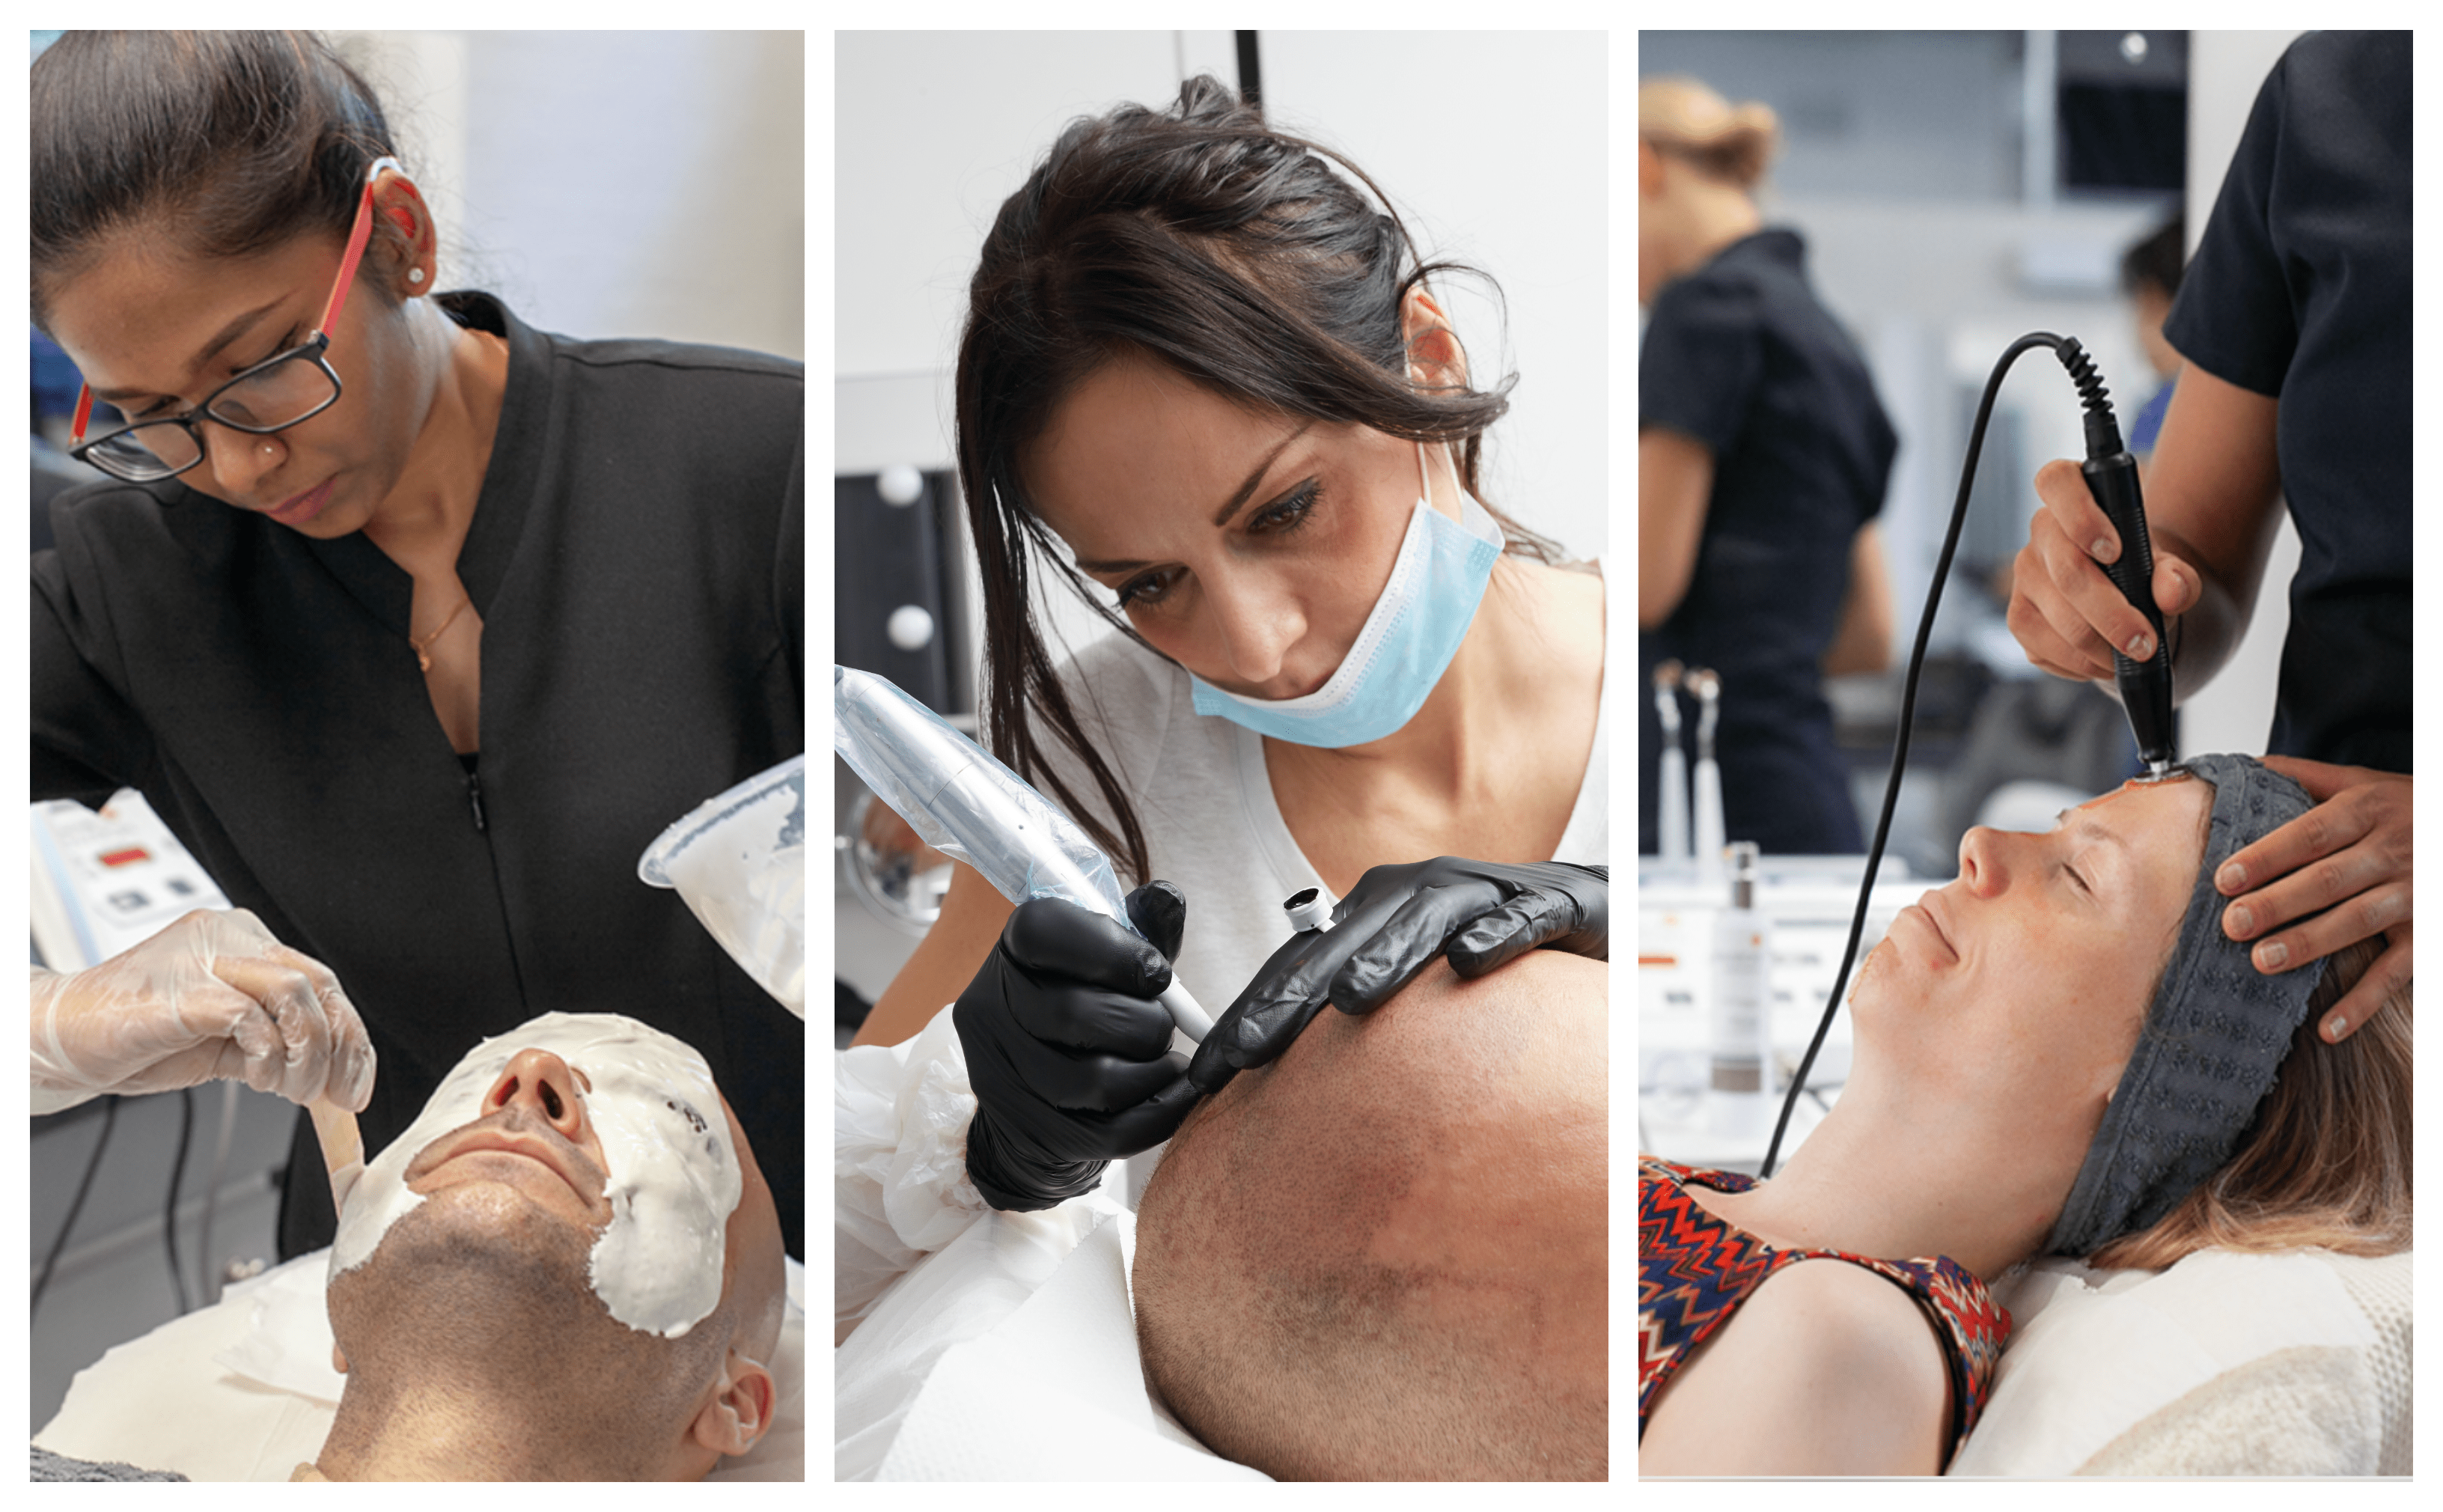 London's Best Aesthetics, Permanent Makeup And Beauty Training - Cosmetic College